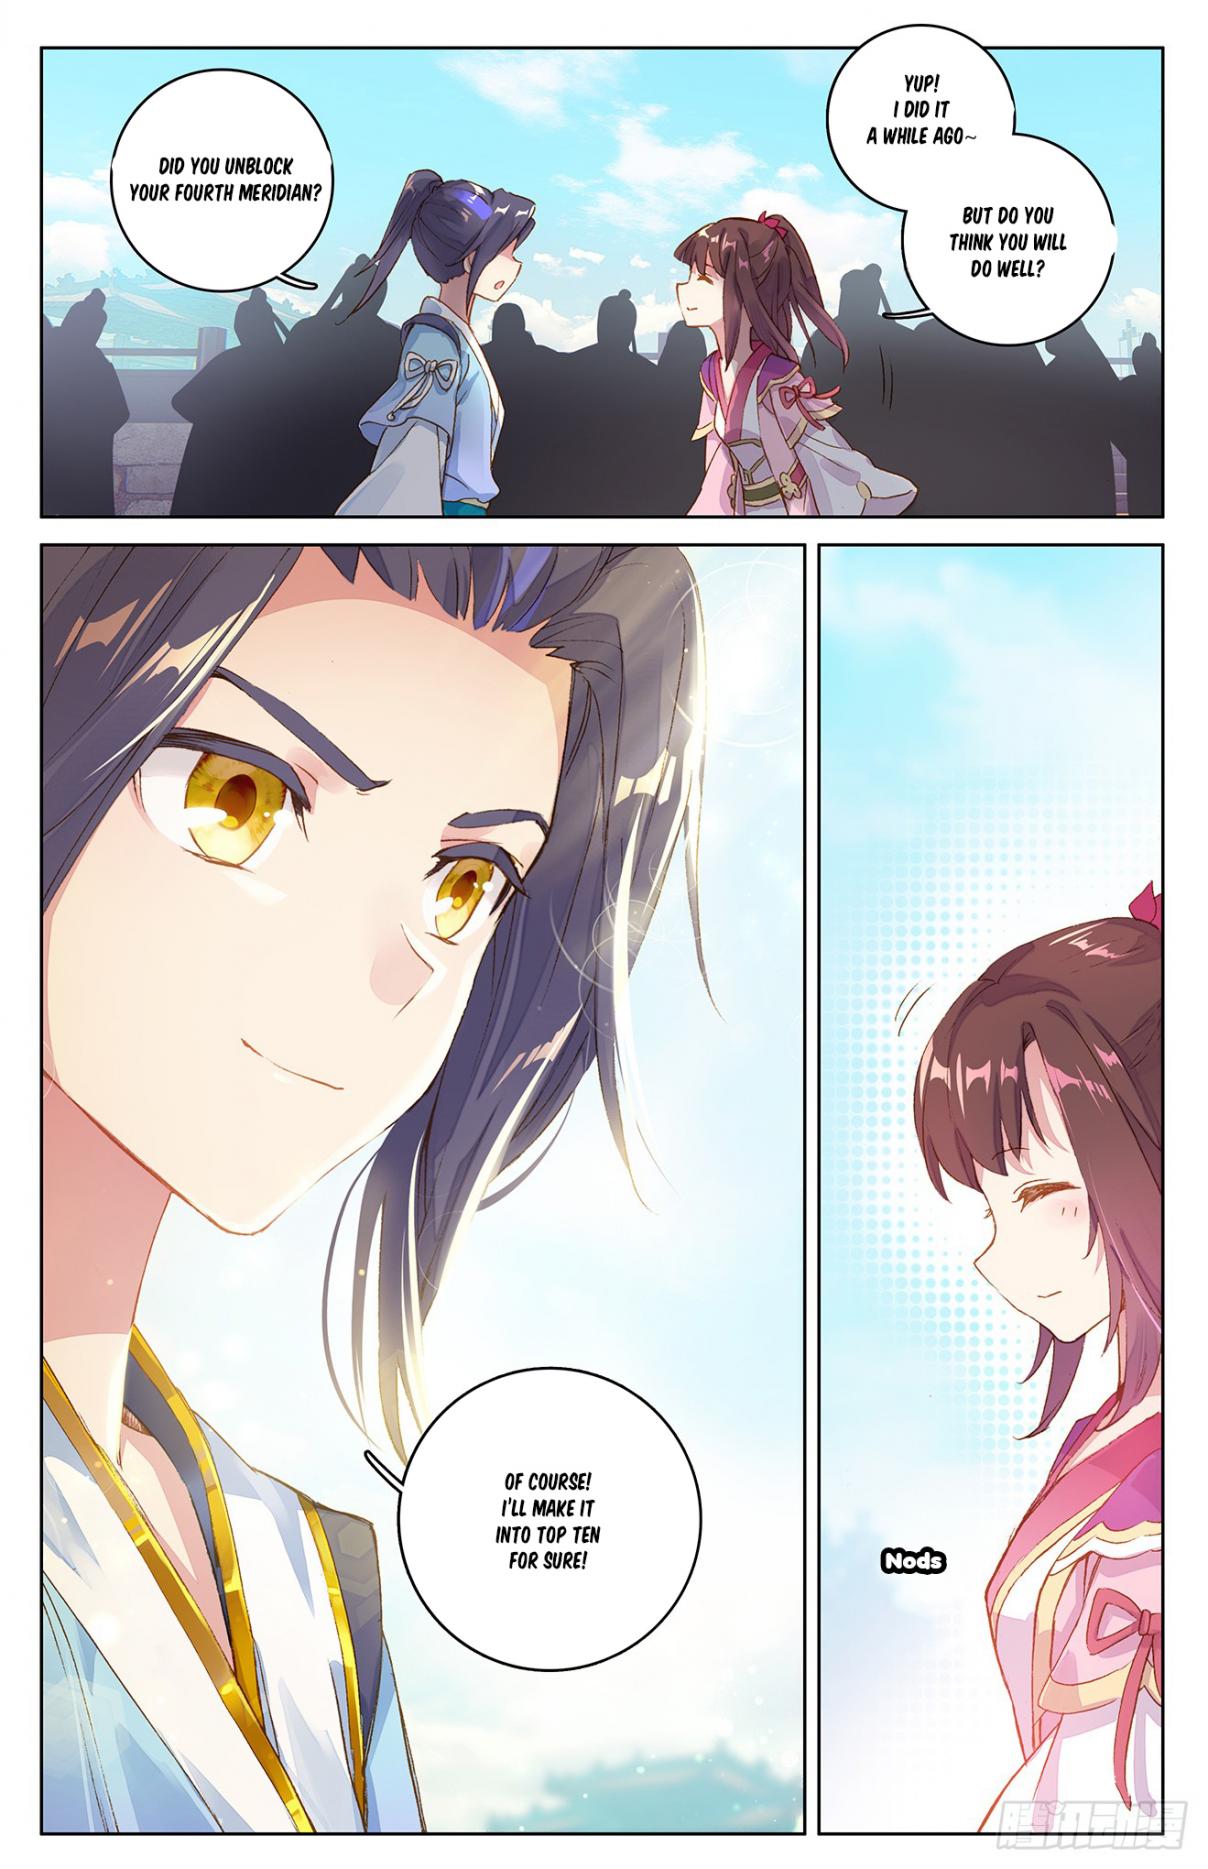 Yuan Zun Ch. 21.5 The Competition begins (part 2)